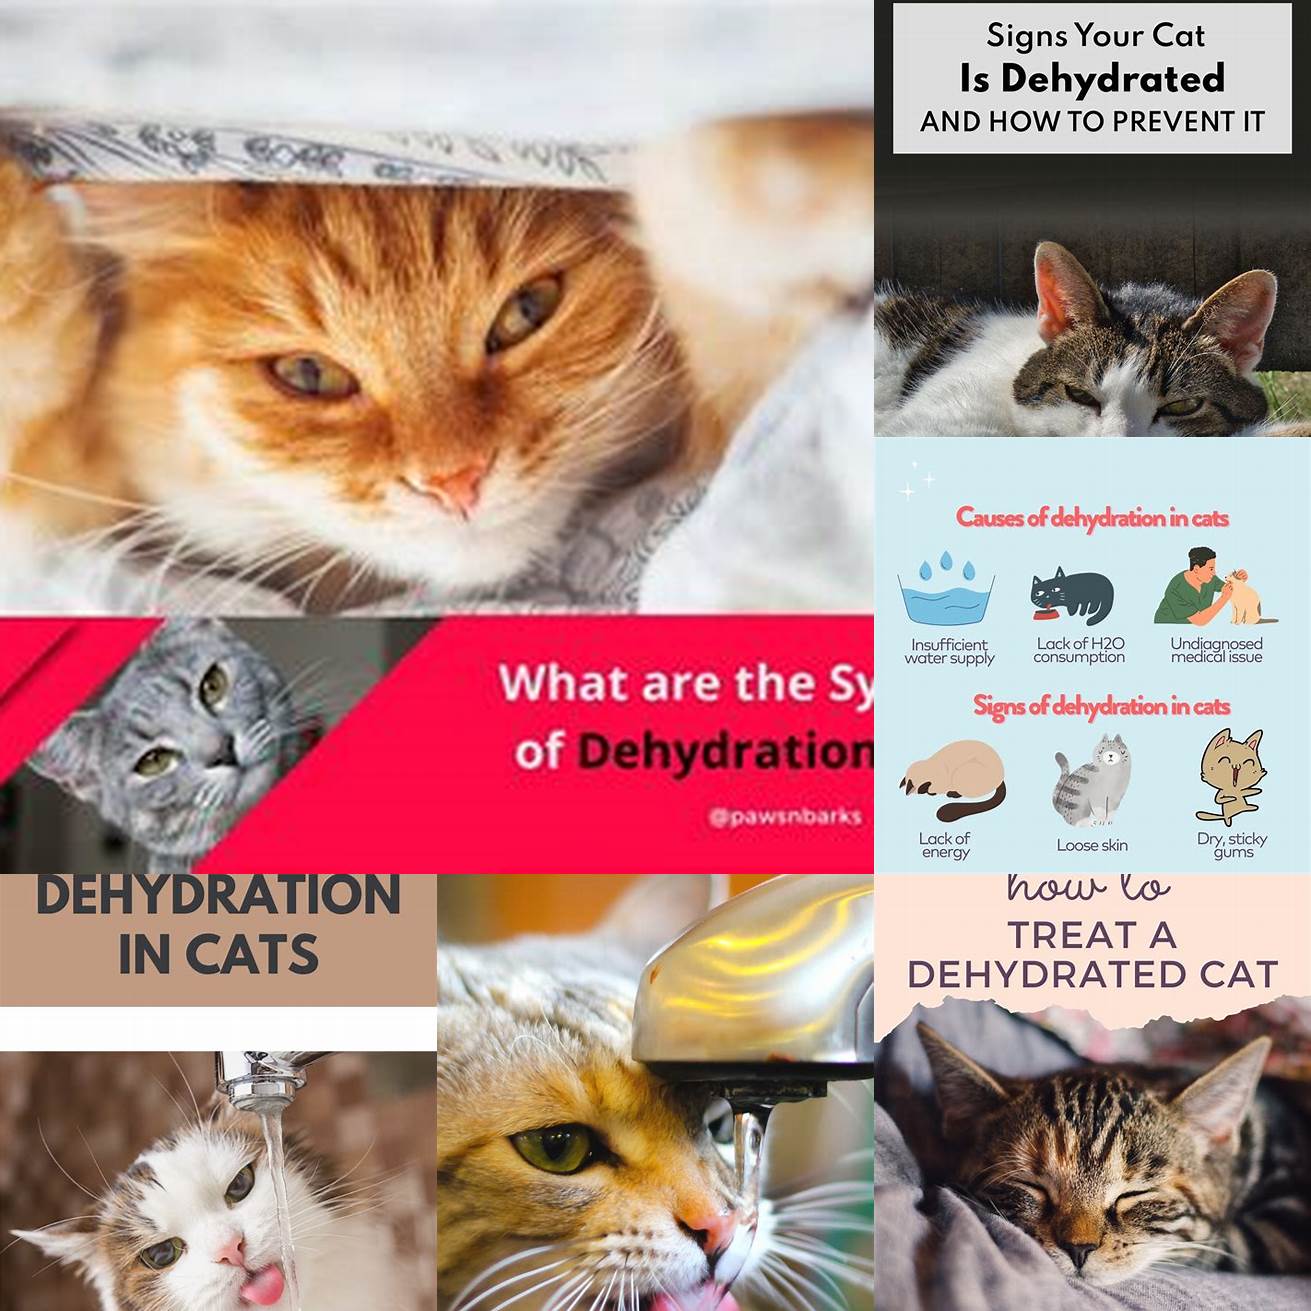 Q What are the signs of dehydration in cats